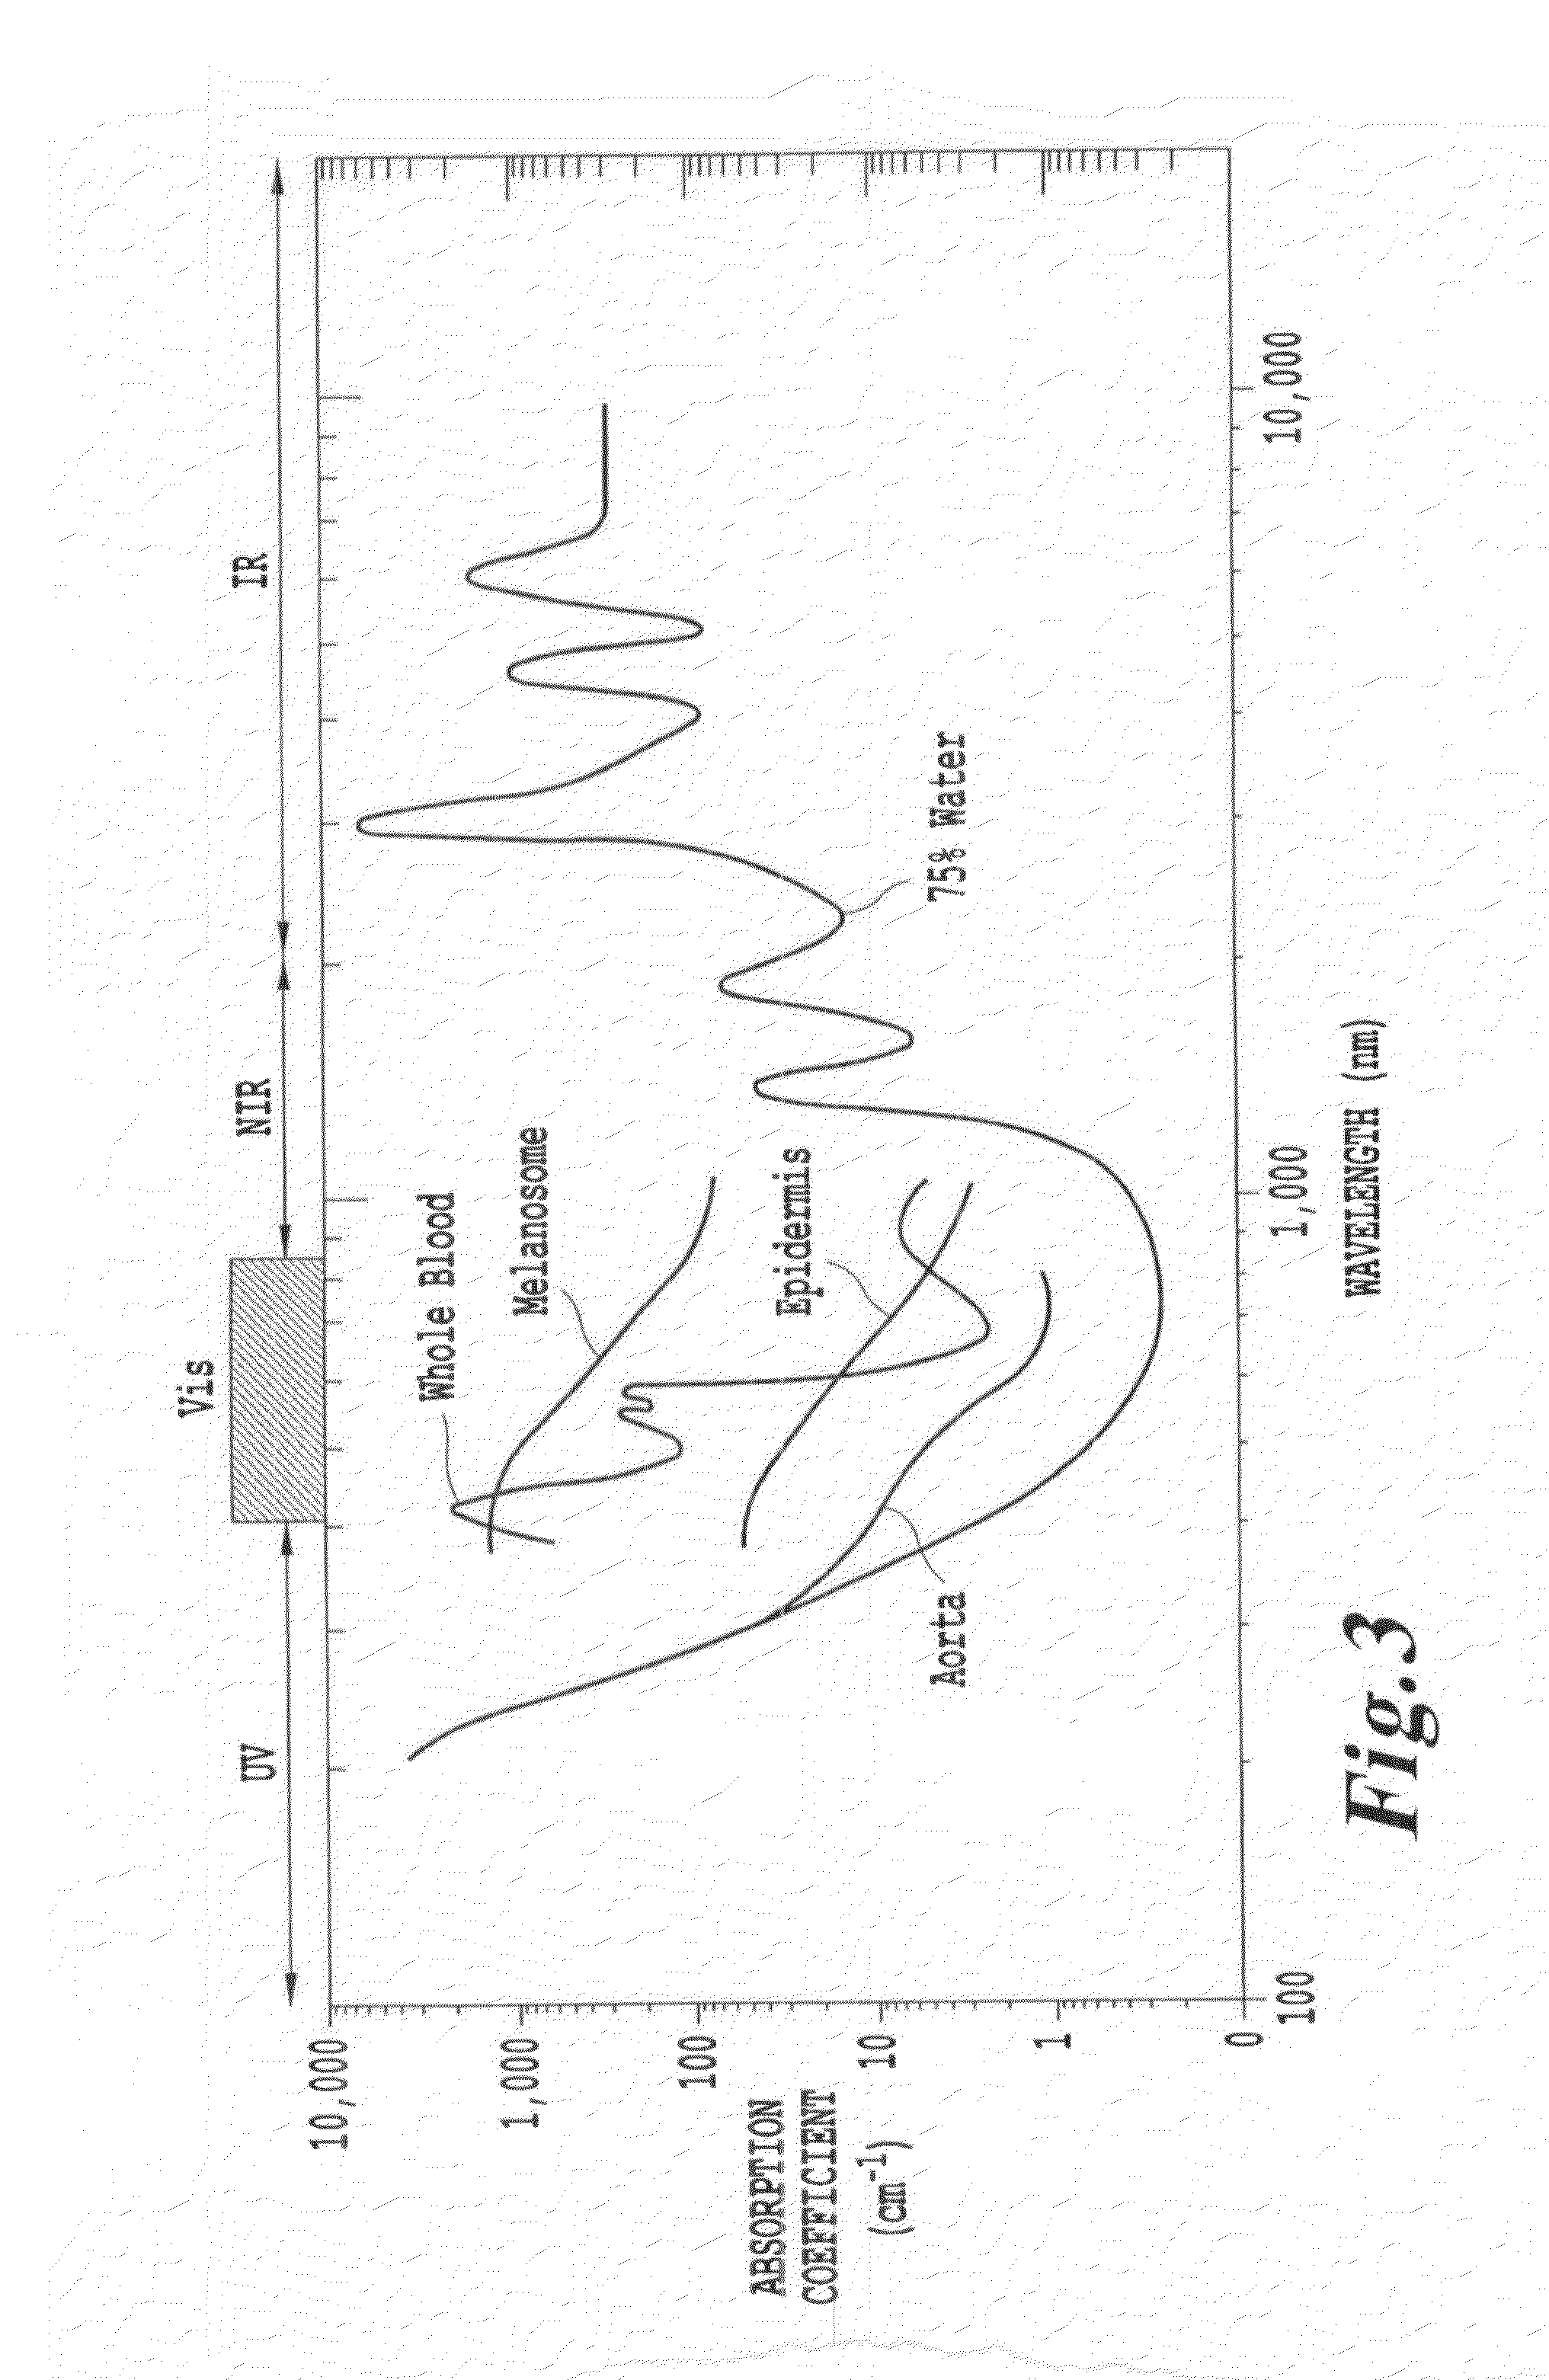 Non-invasive energy upconversion methods and systems